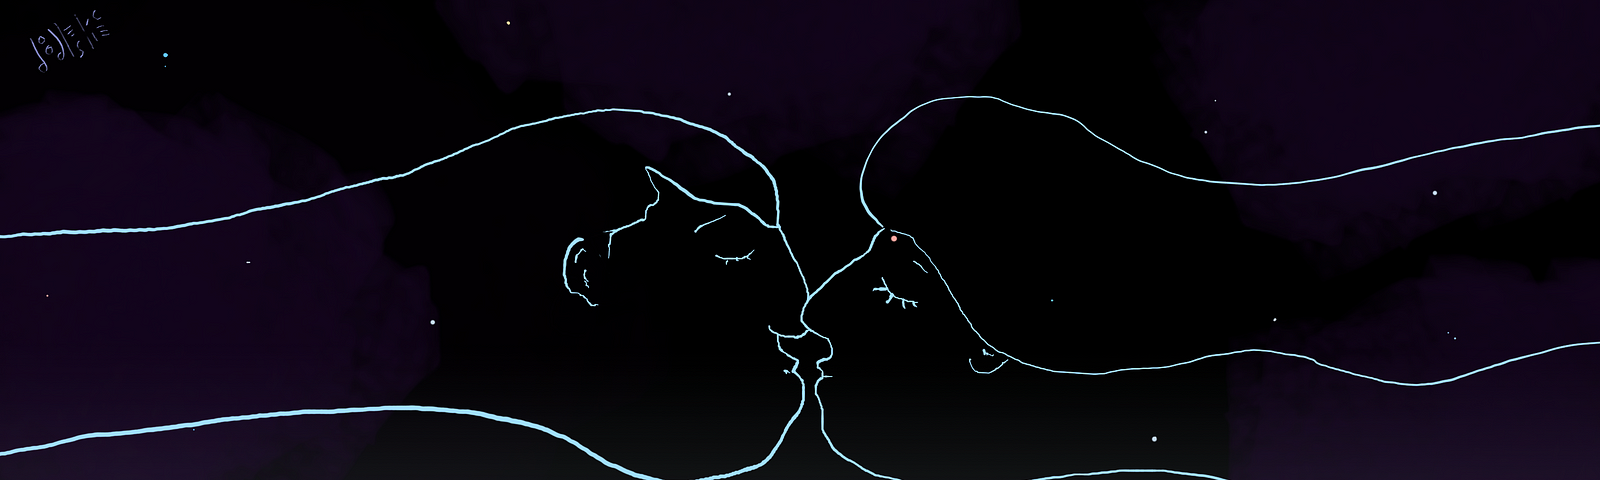 A digital drawing of two ethereal beings, male and female, stretching across a night sky to kiss beneath stars. Art by Doodleslice 2024